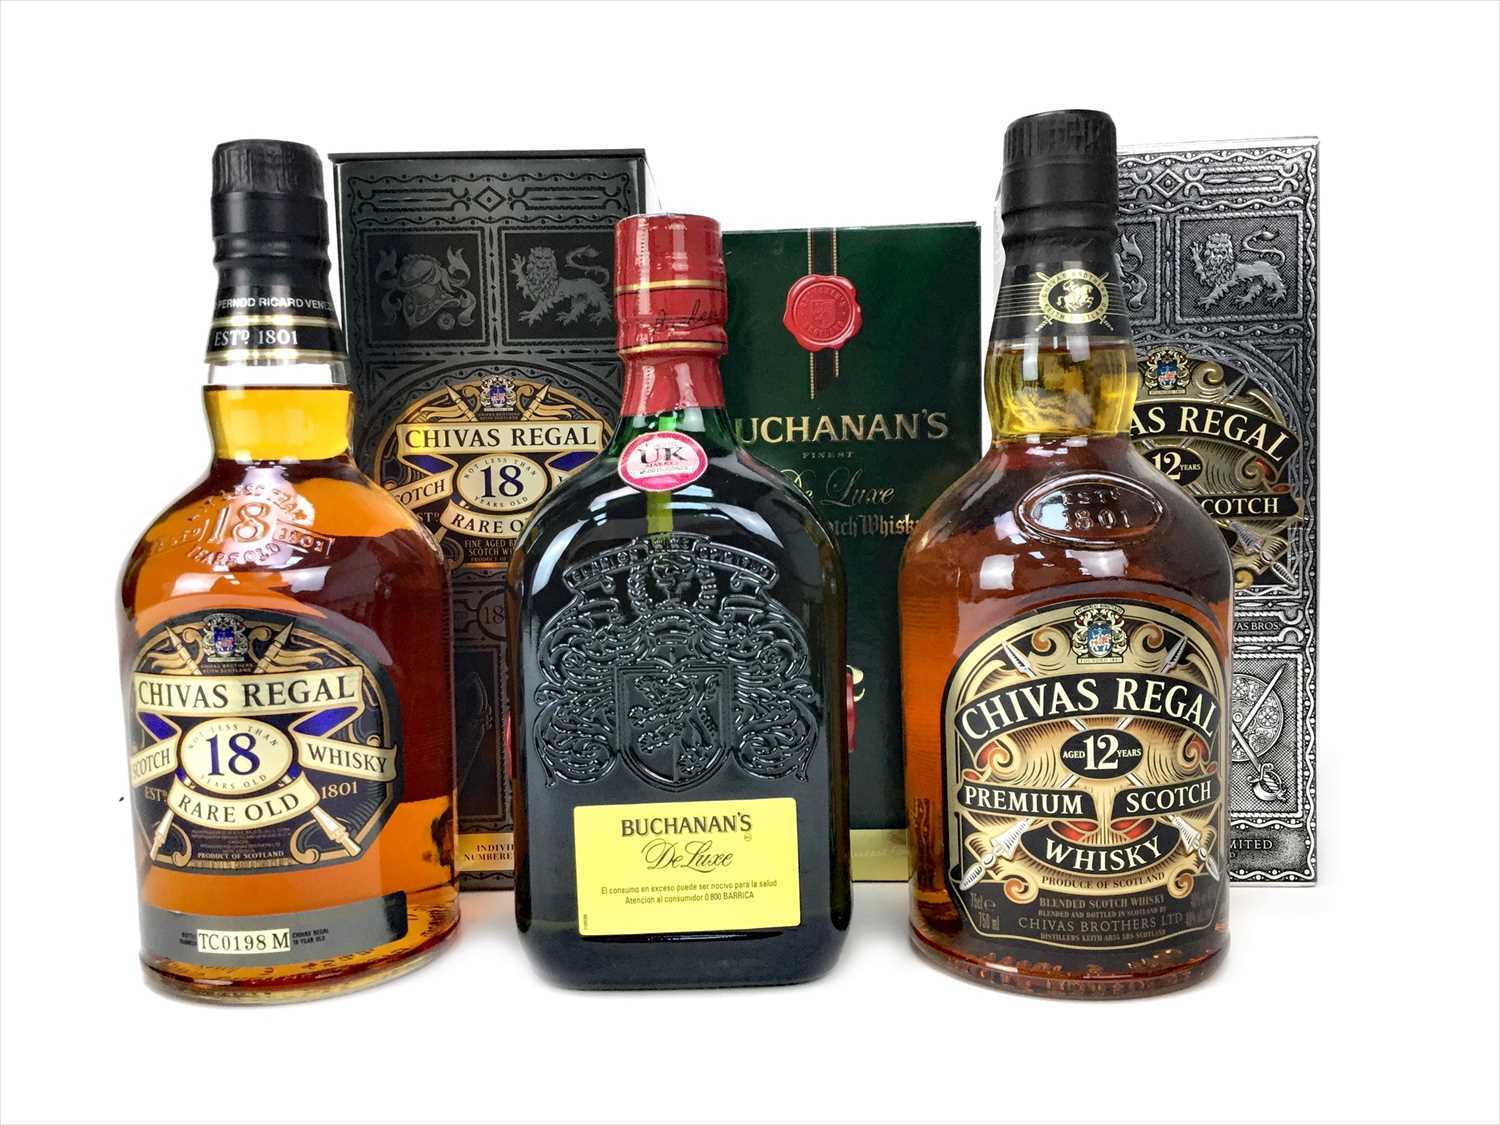 Lot 435 - CHIVAS REGAL RARE OLD 18 YEARS OLD, CHIVAS REGAL AGED 12 YEARS AND BUCHANAN'S AGED 12 YEARS